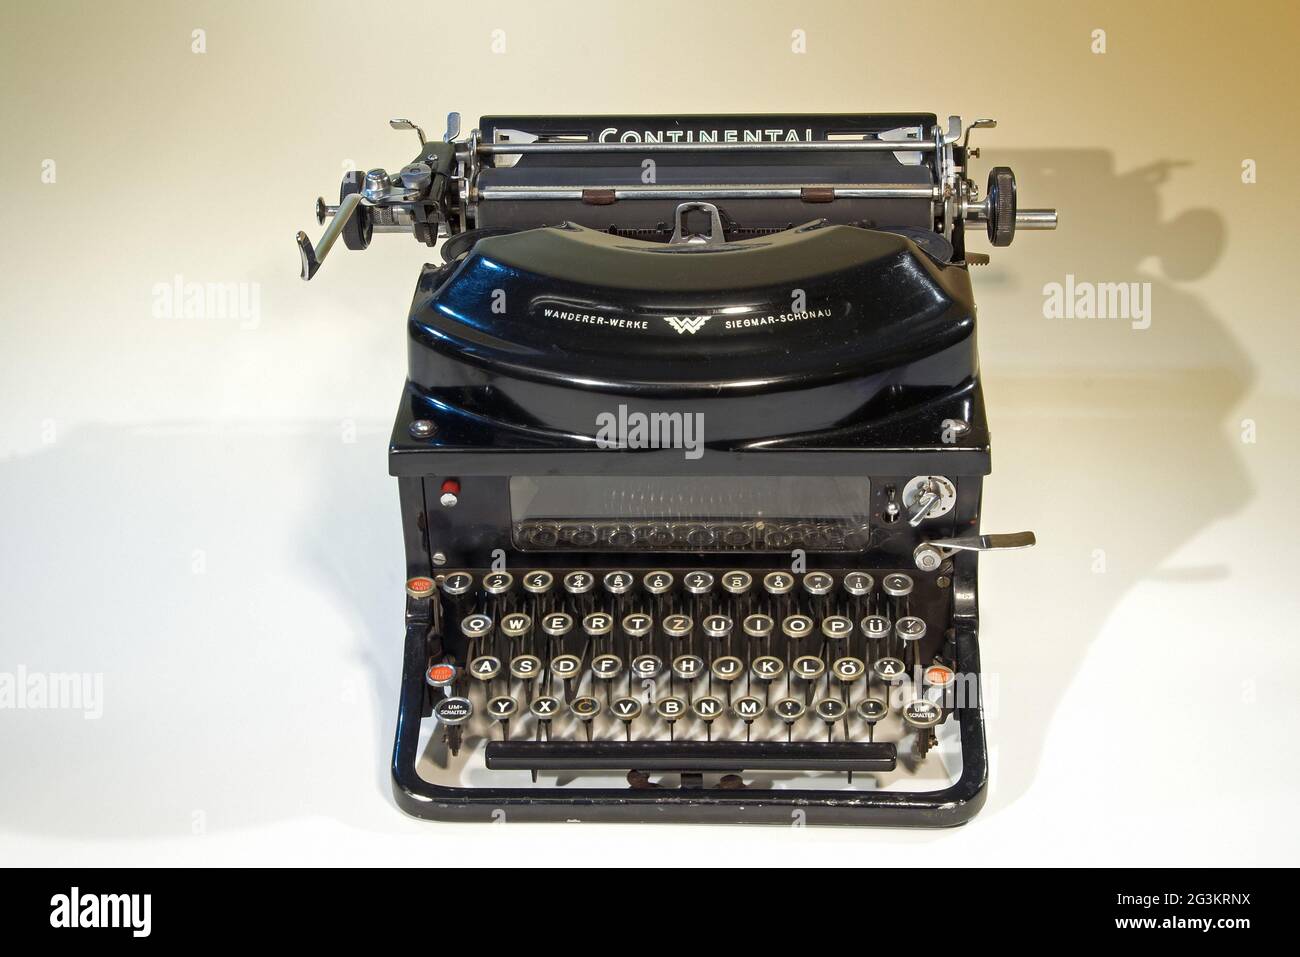 office, old mechanical typewriter, type Continental, Wanderer plant in Siegmar-Schoenau, ADDITIONAL-RIGHTS-CLEARANCE-INFO-NOT-AVAILABLE Stock Photo